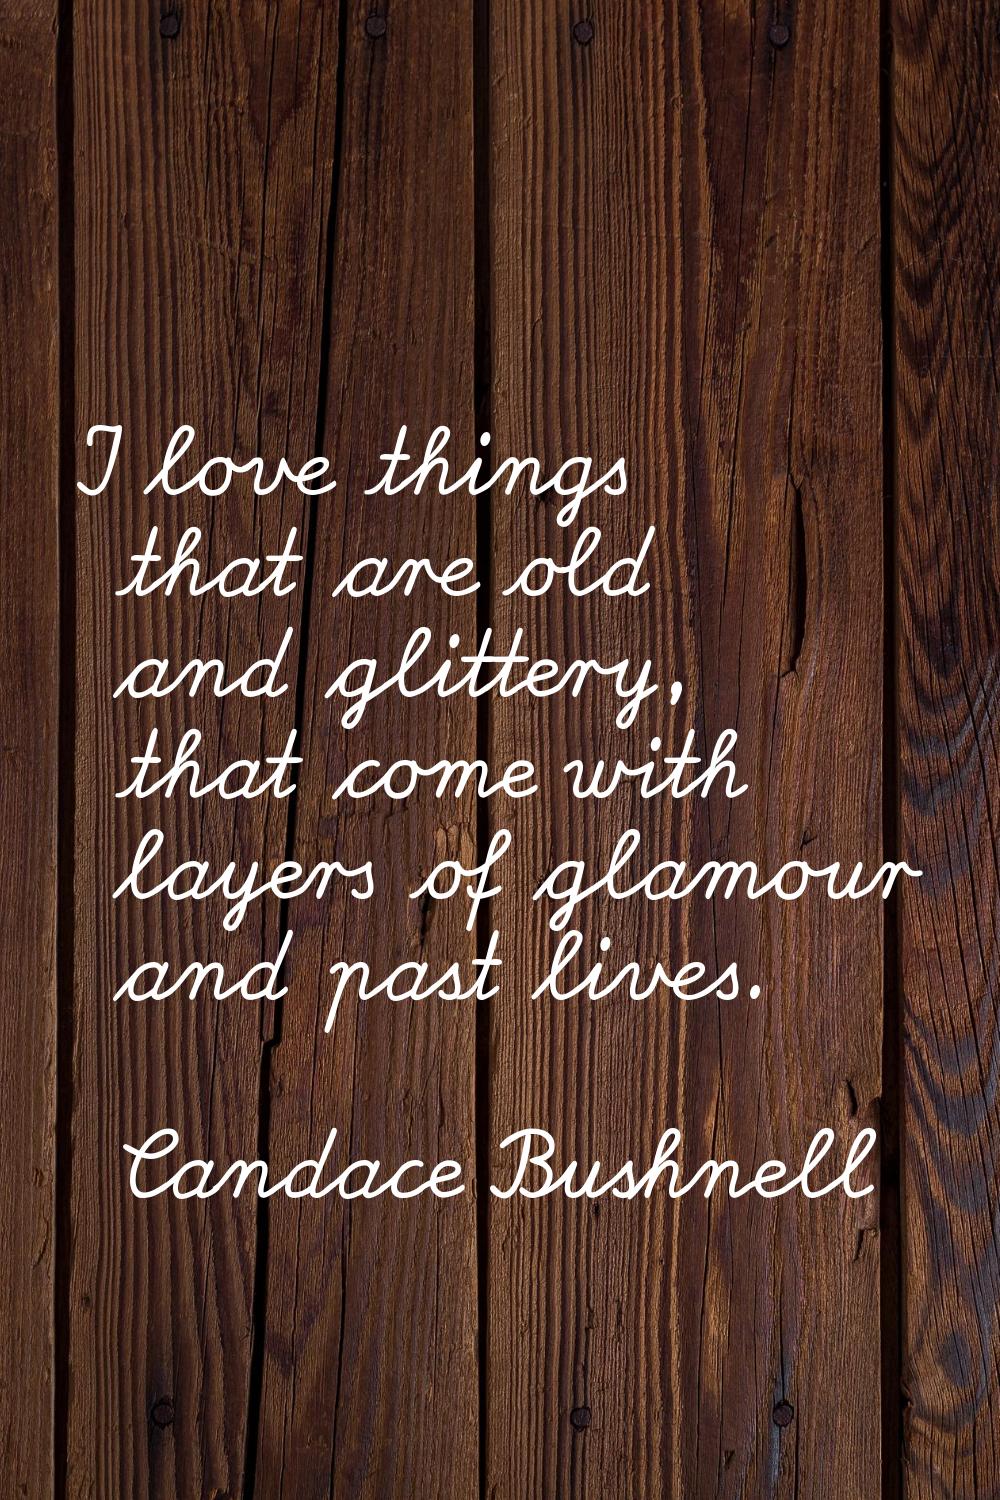 I love things that are old and glittery, that come with layers of glamour and past lives.